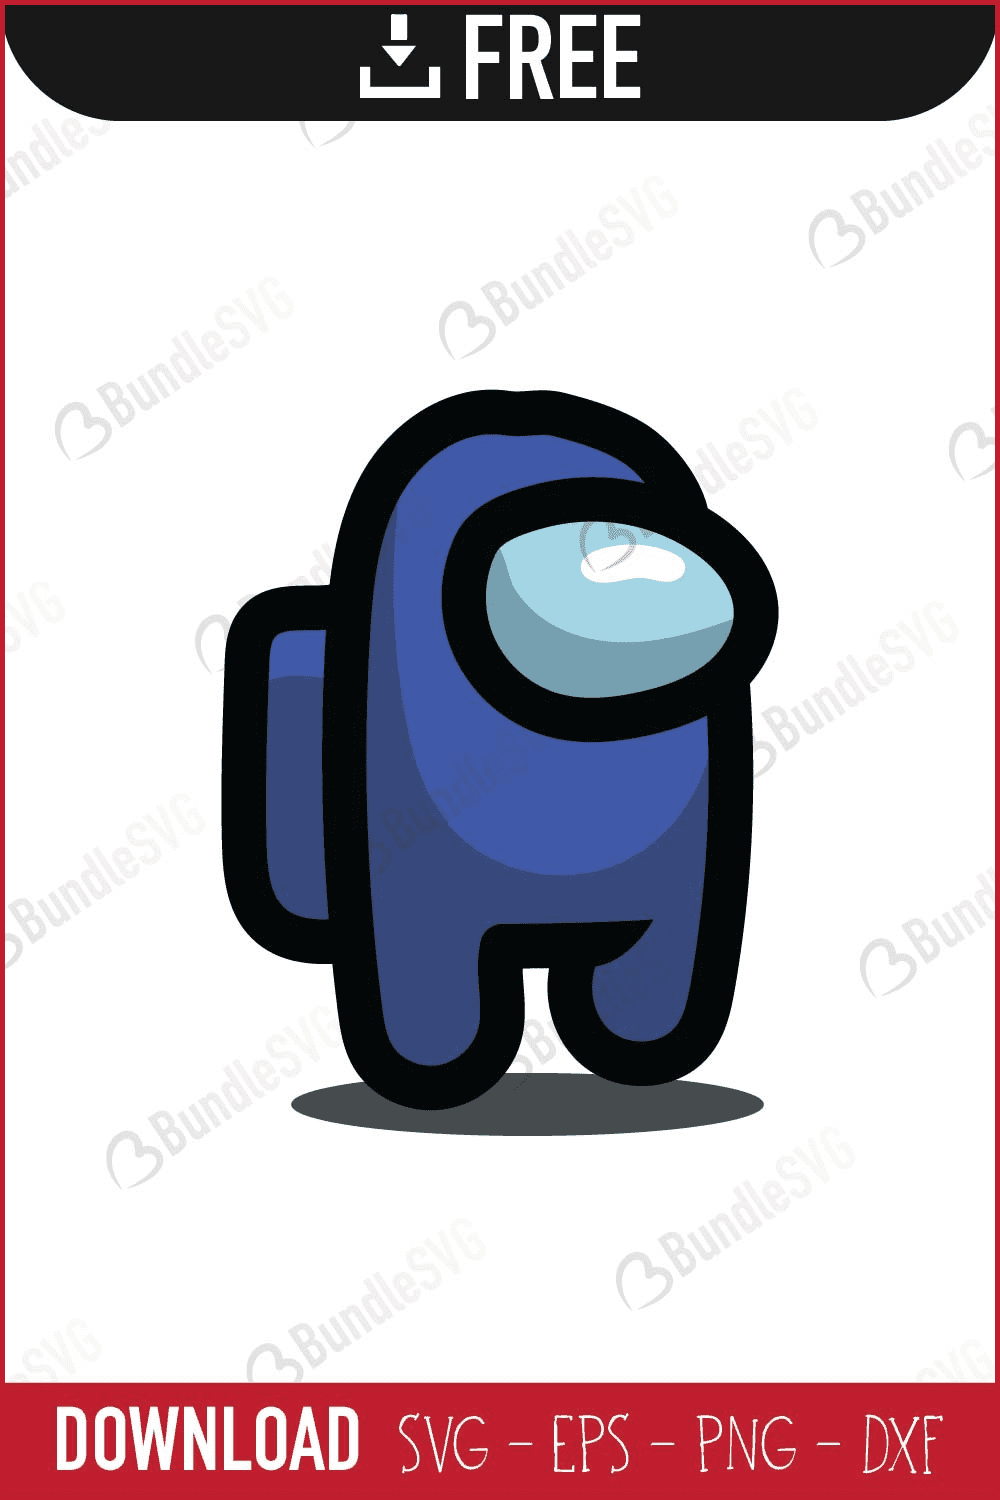 Among Us Character SVG Cut Files, PNG Images & Svg Layered